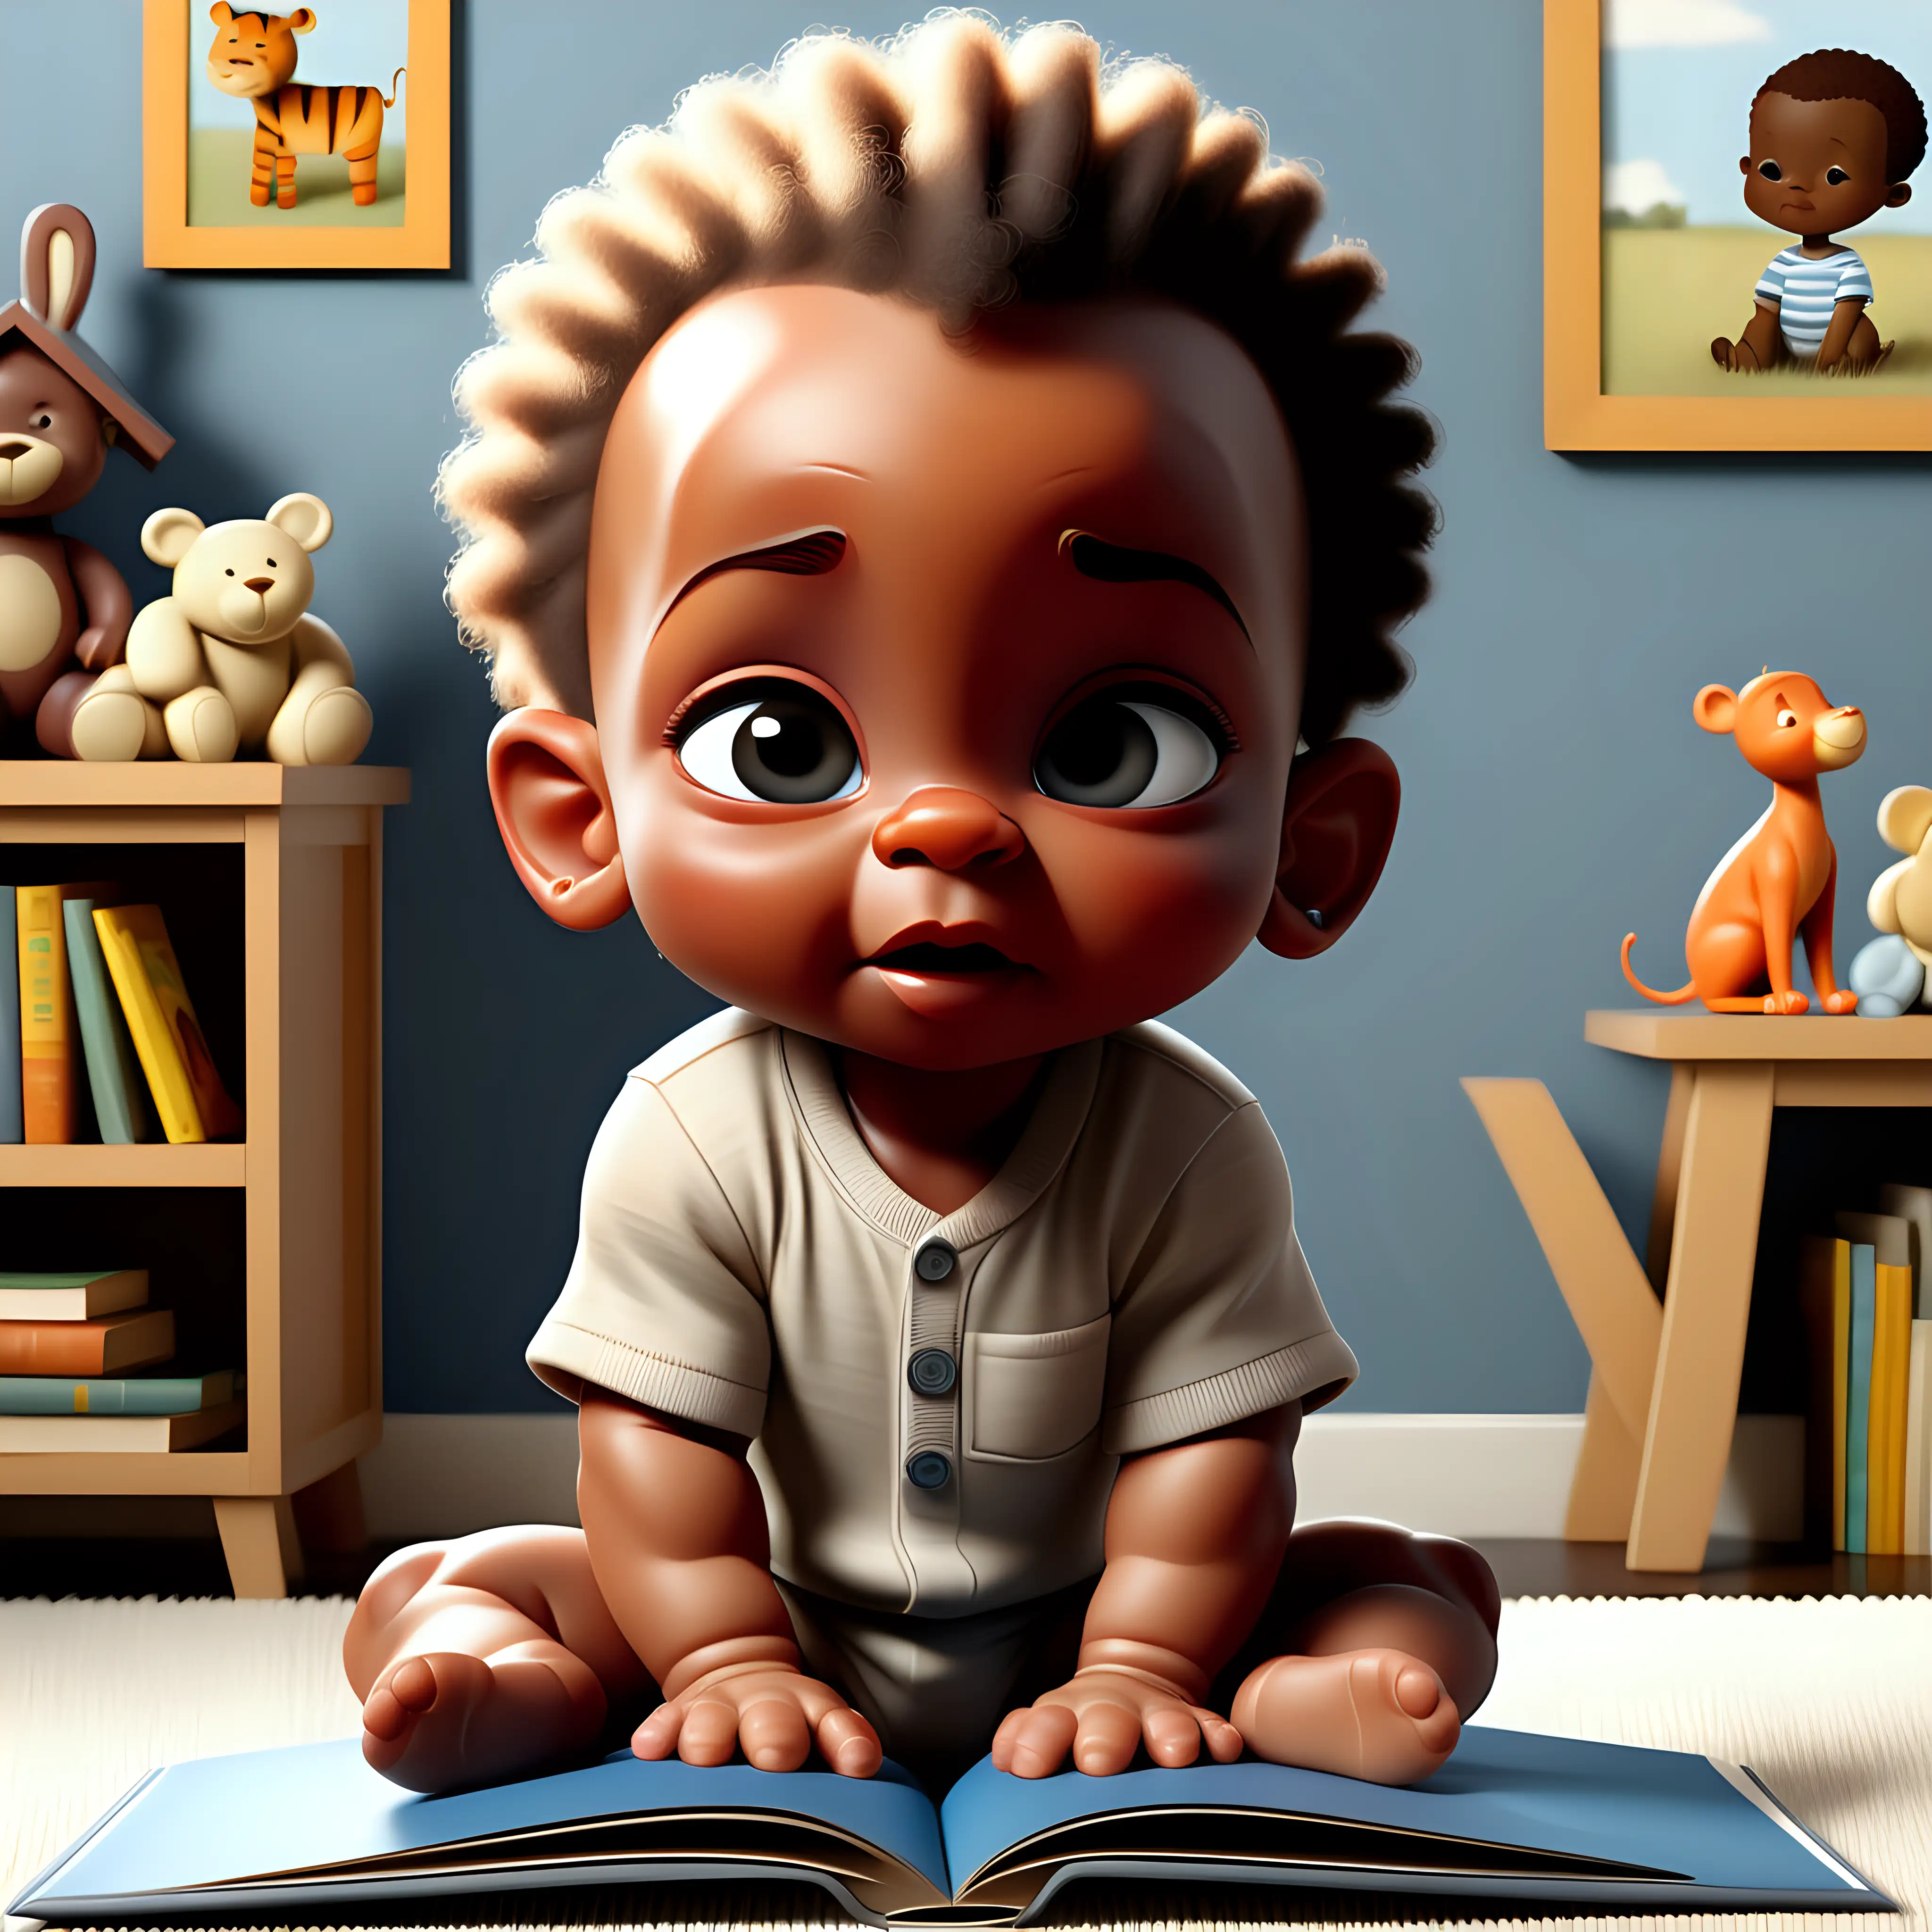 Charming African American Baby Boy in Childrens Book Style